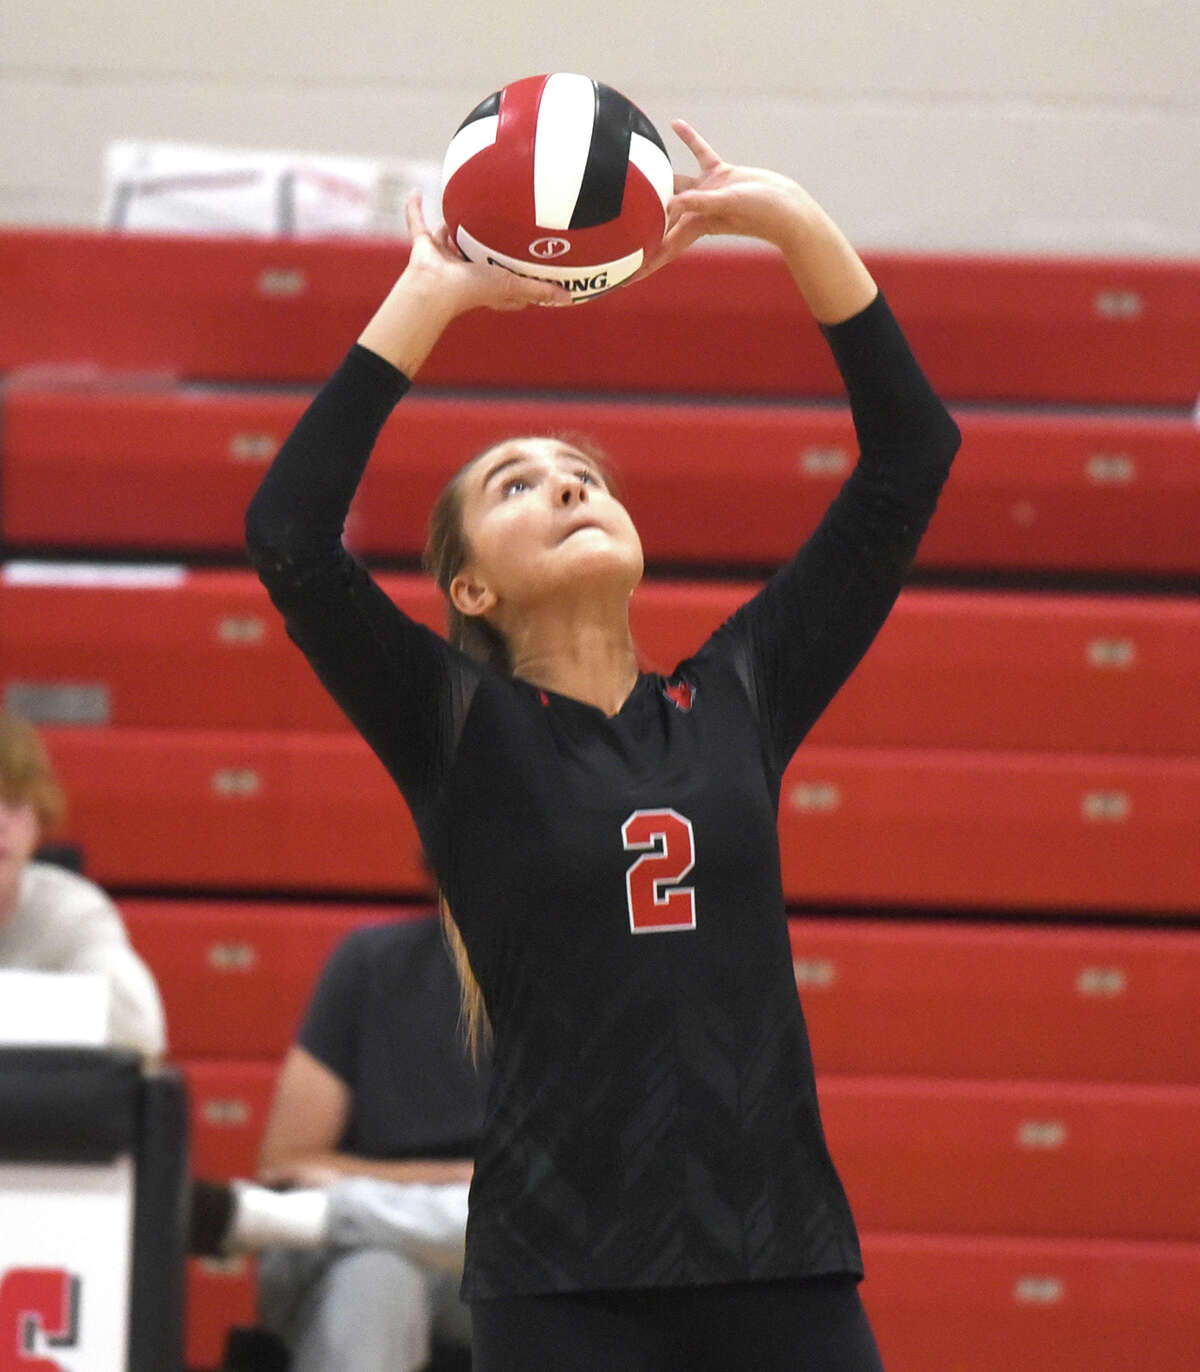 New Canaan senior setter Olivia Zaorski sets the ball during the Rams' volleyball match against Wilton in New Canaan on Thursday, Sept. 29, 2022.